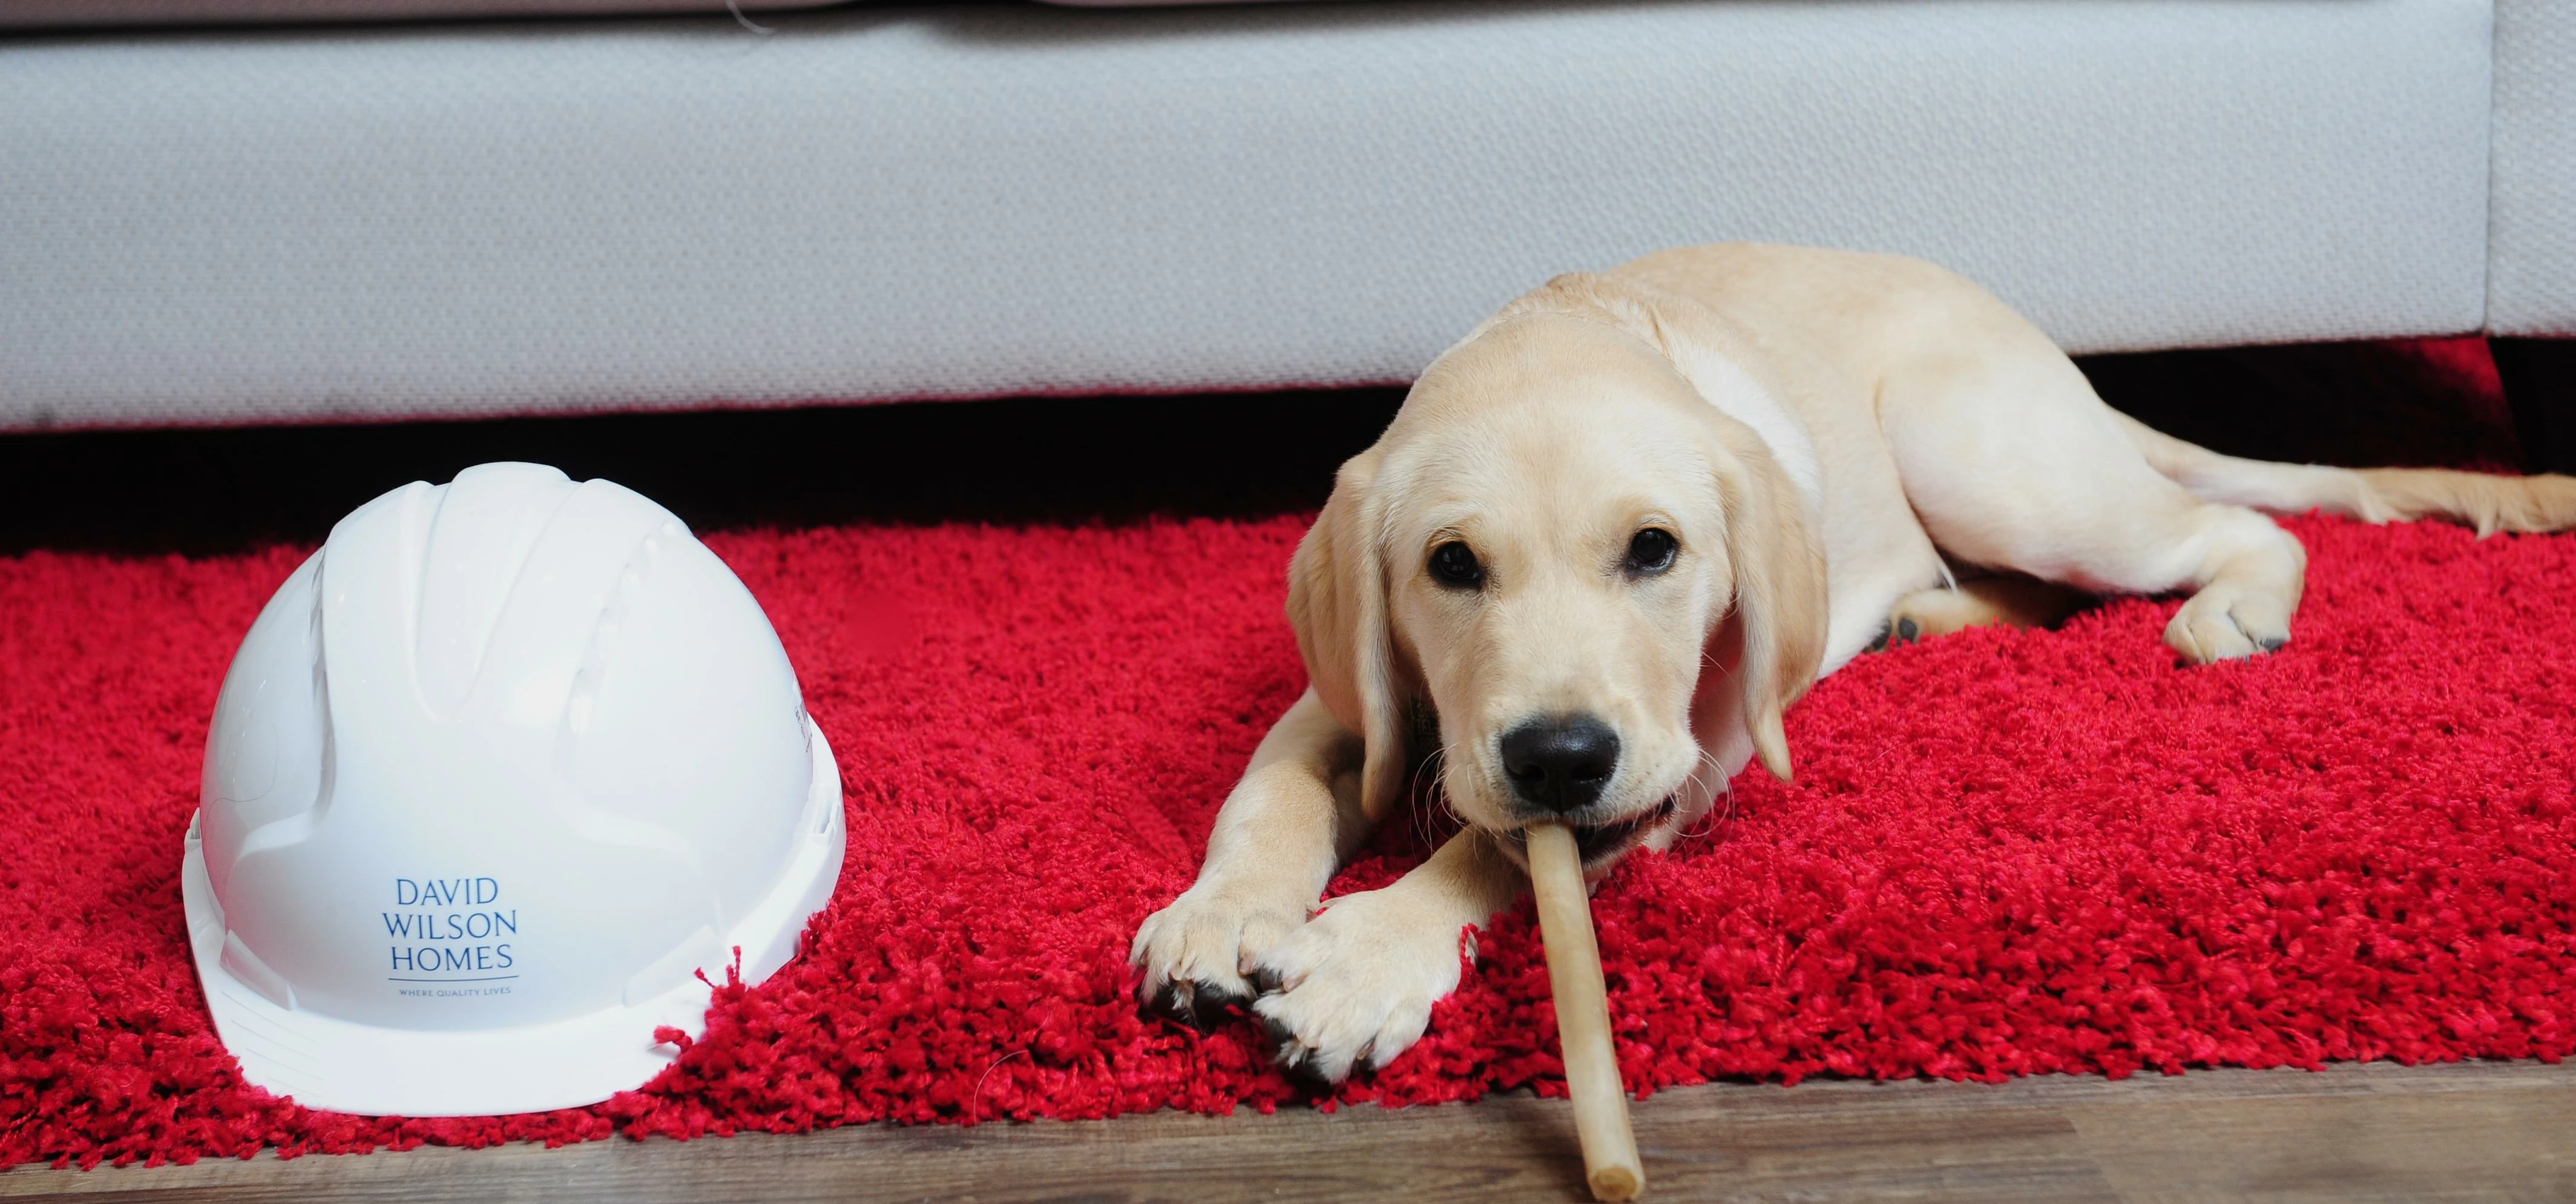 David Wilson Homes is supporting the training of a guide dog puppy